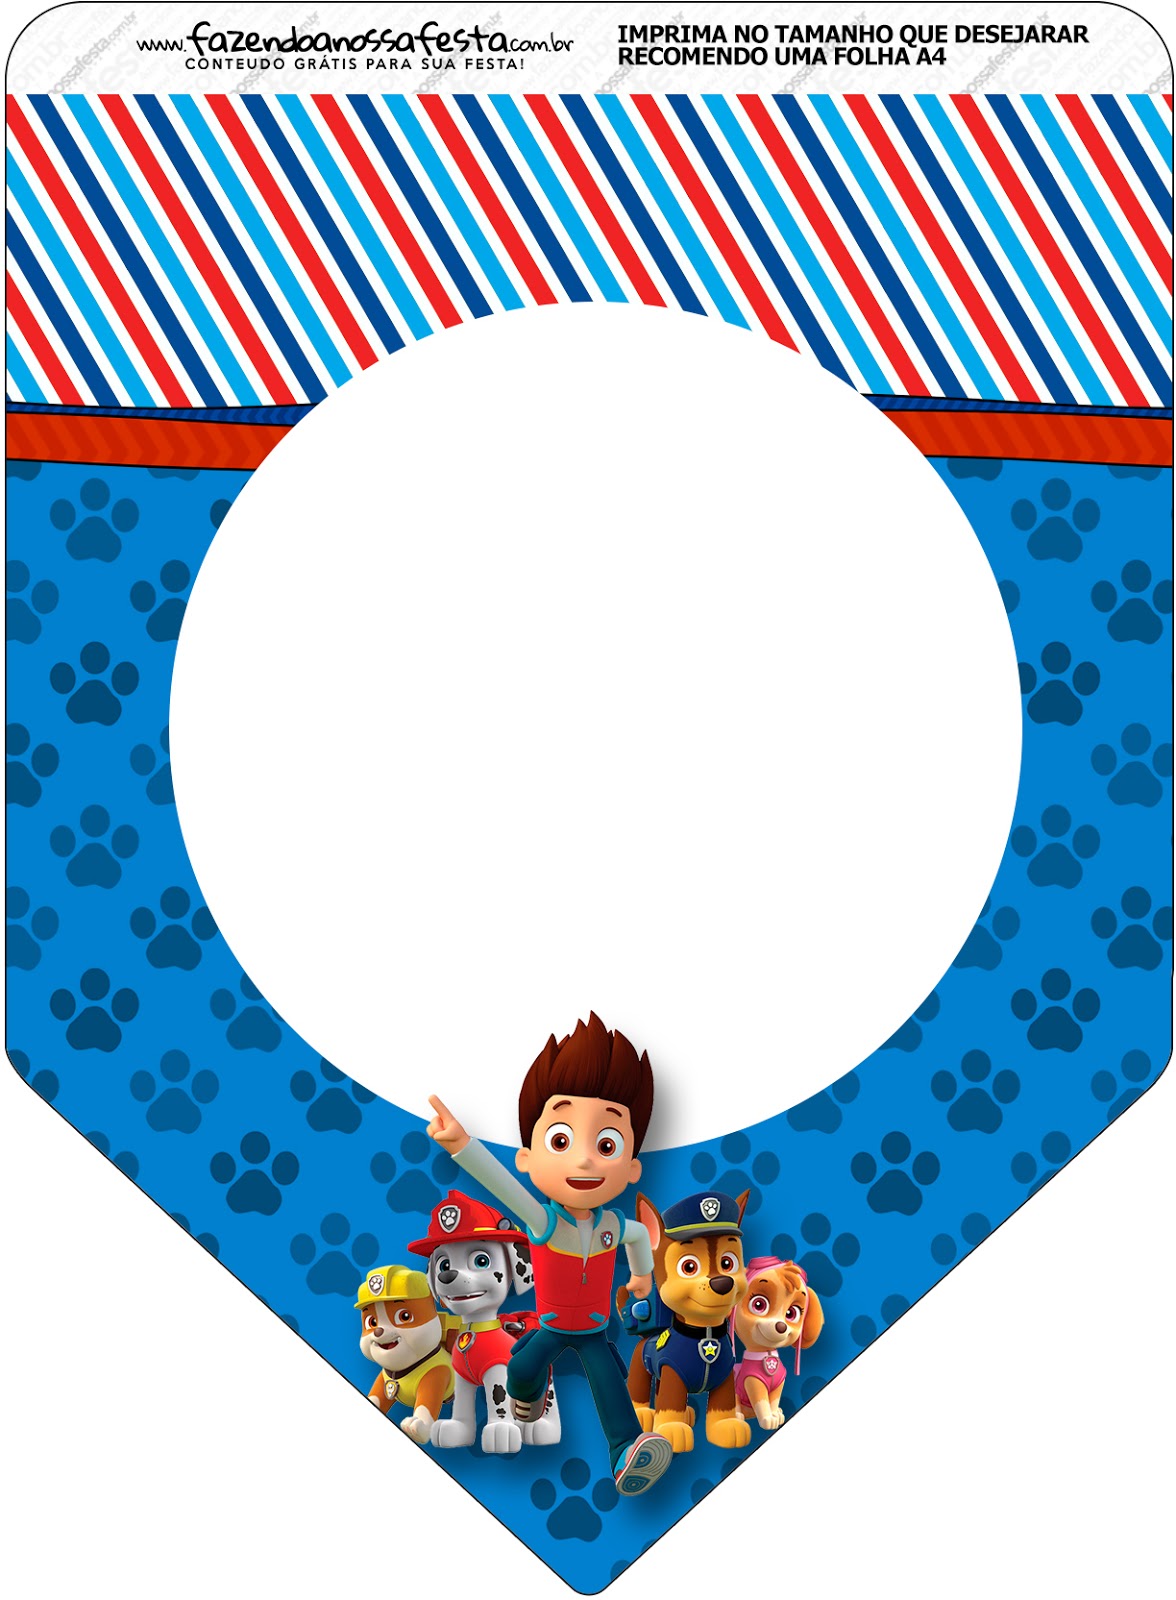 Paw Patrol: Free Party Printables. - Oh My Fiesta! in english